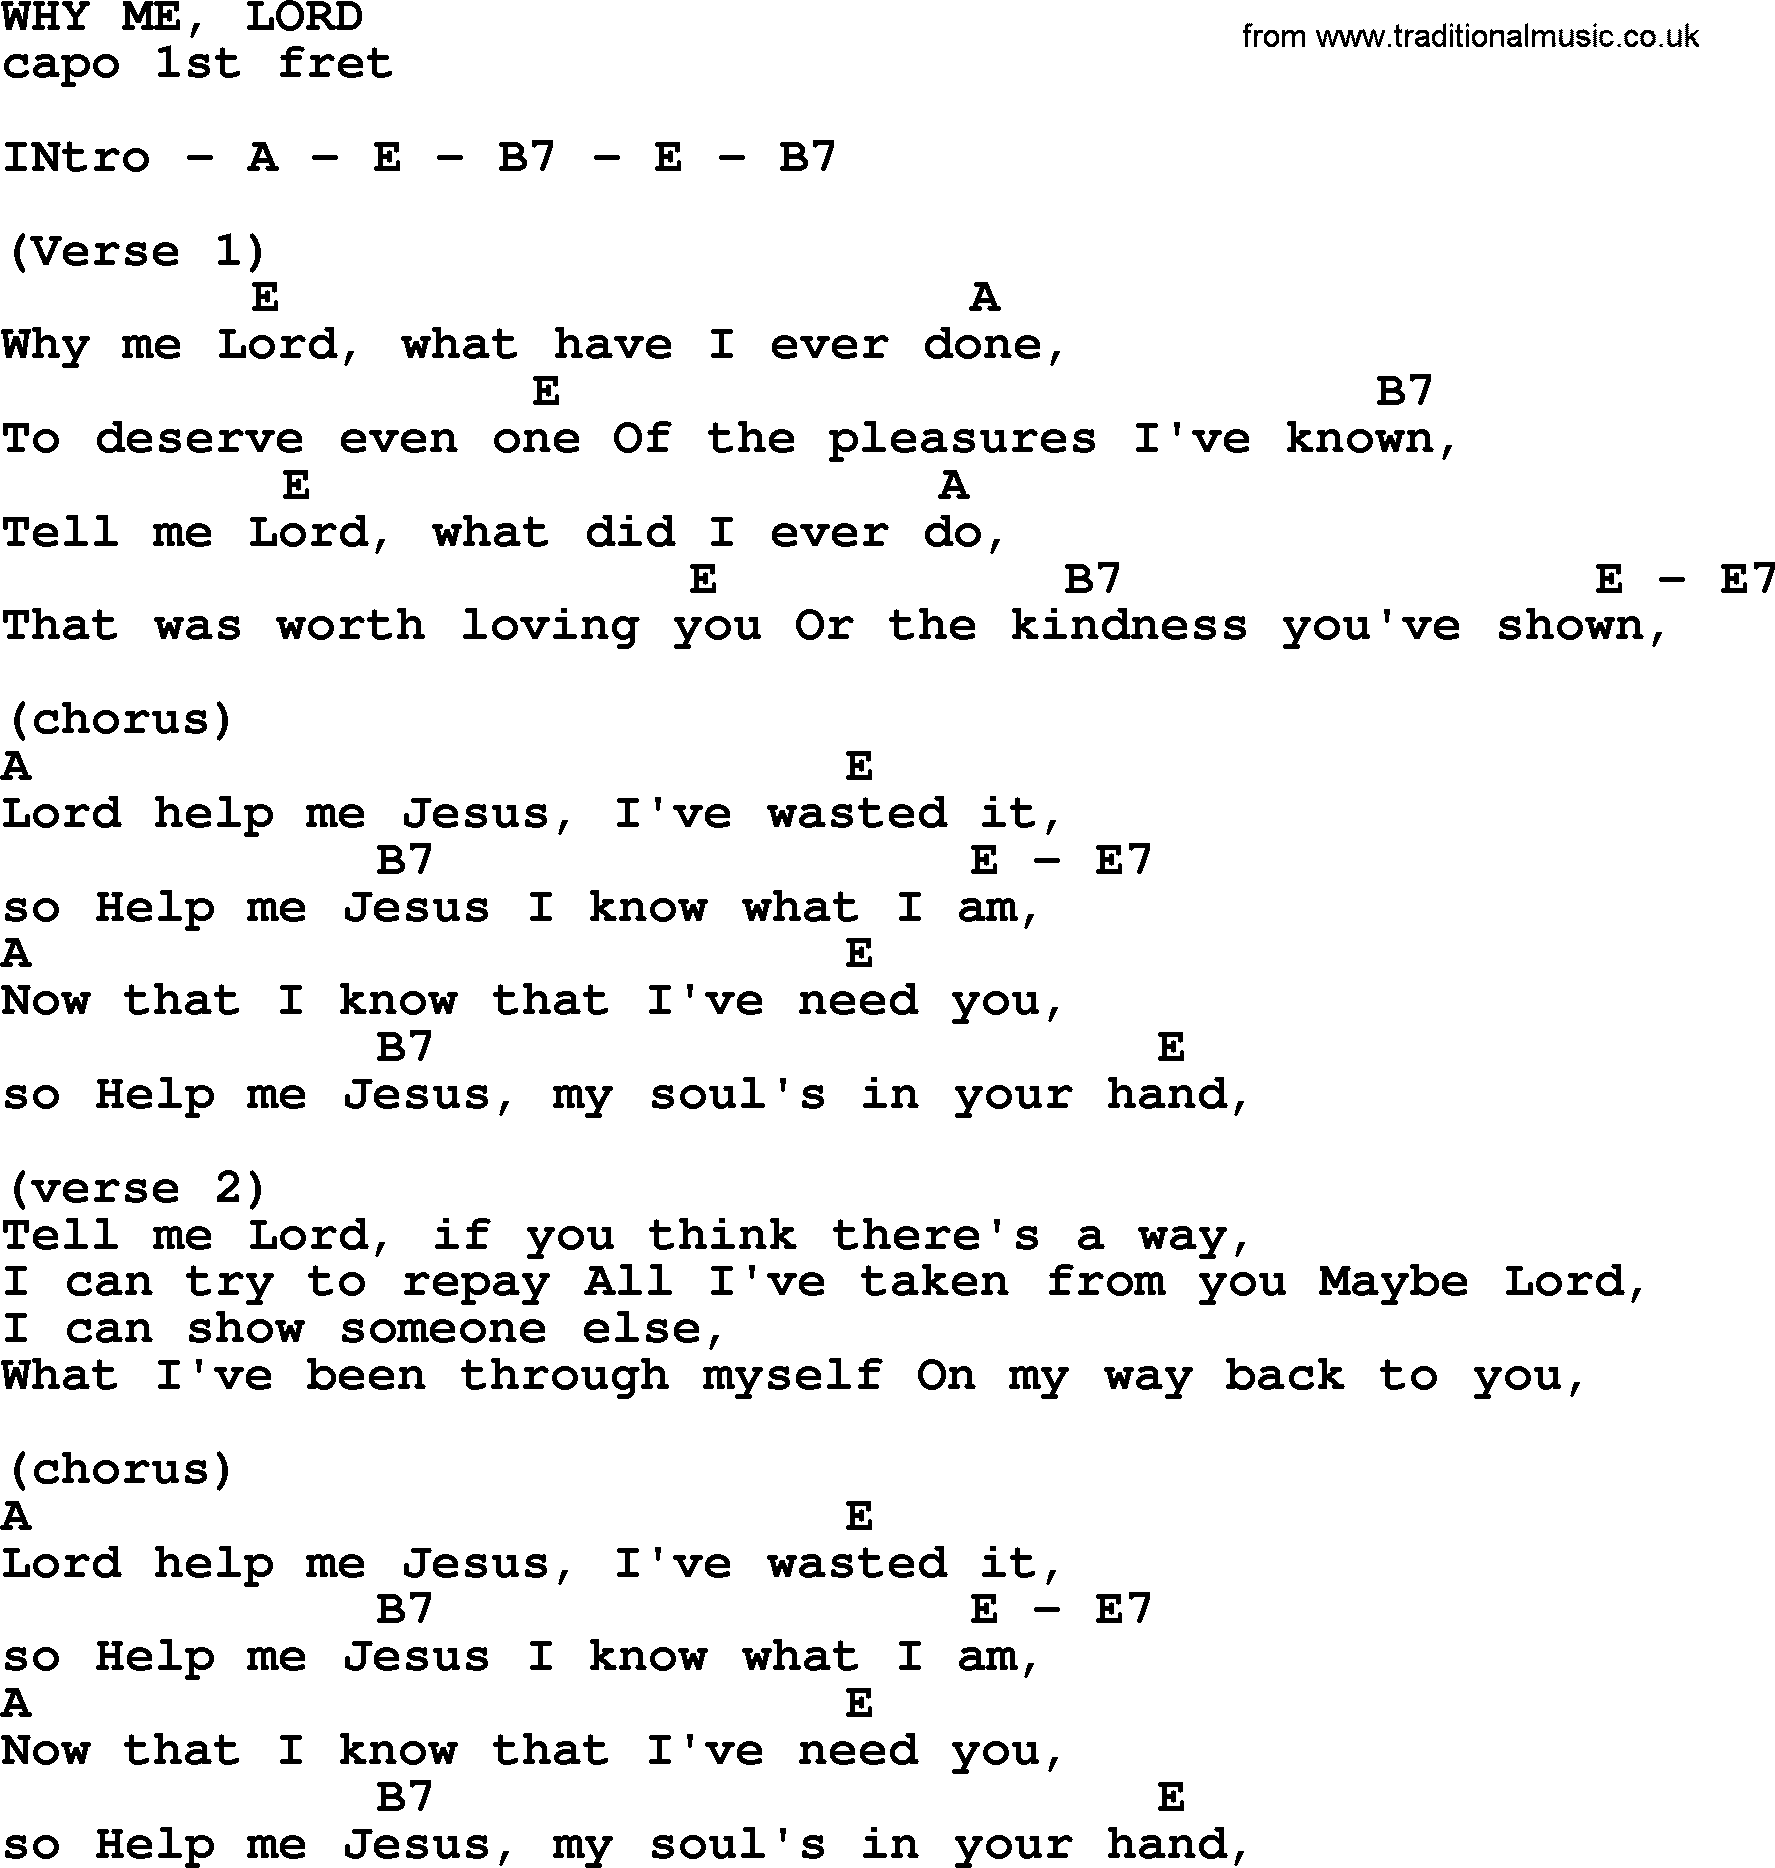 Johnny Cash song Why Me, Lord, lyrics and chords